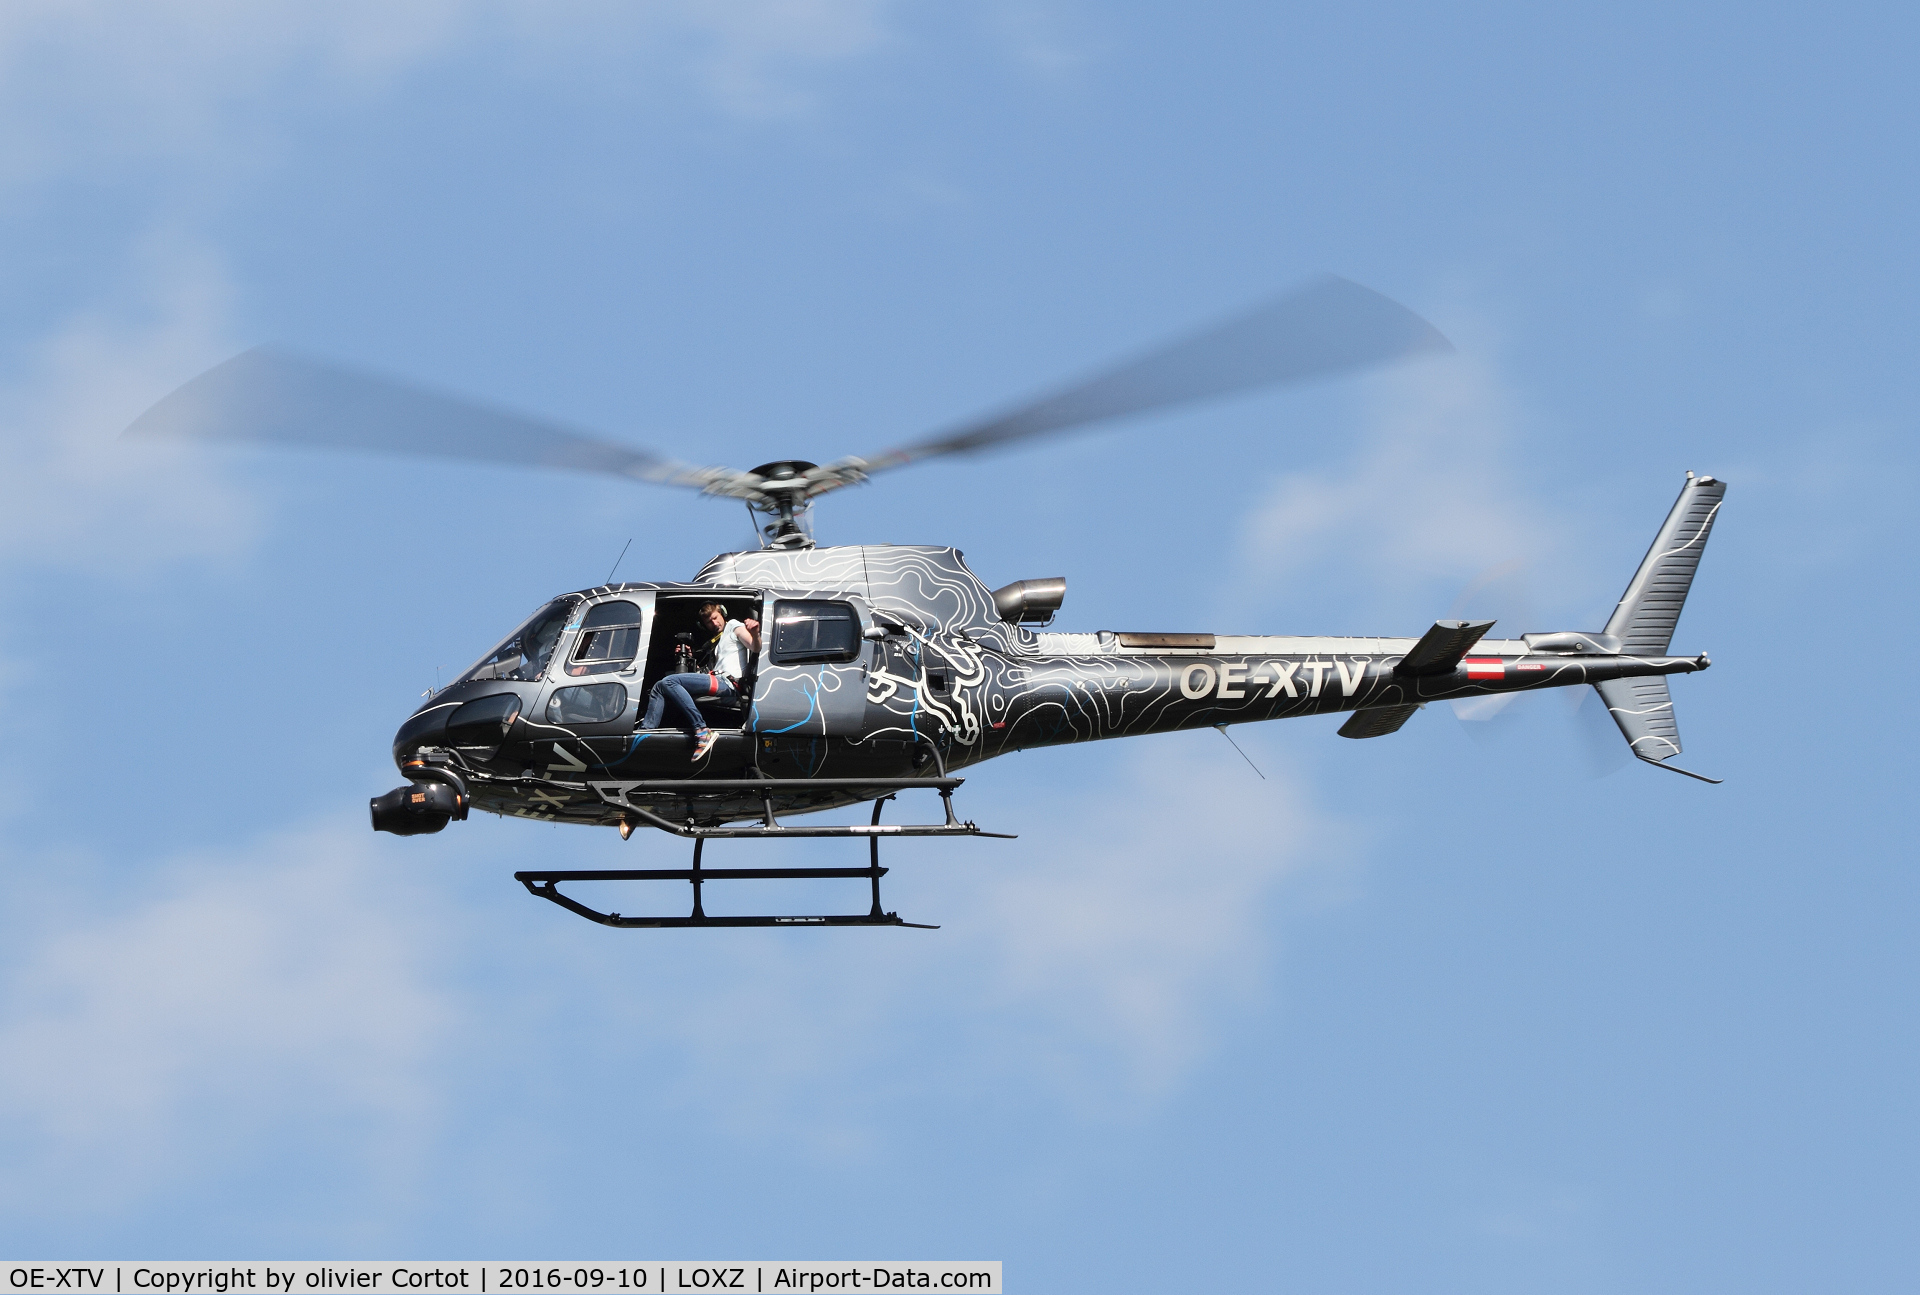 OE-XTV, 2009 Eurocopter AS-350B-3+ Ecureuil Ecureuil C/N 4745, Air Power 16 media helicopter